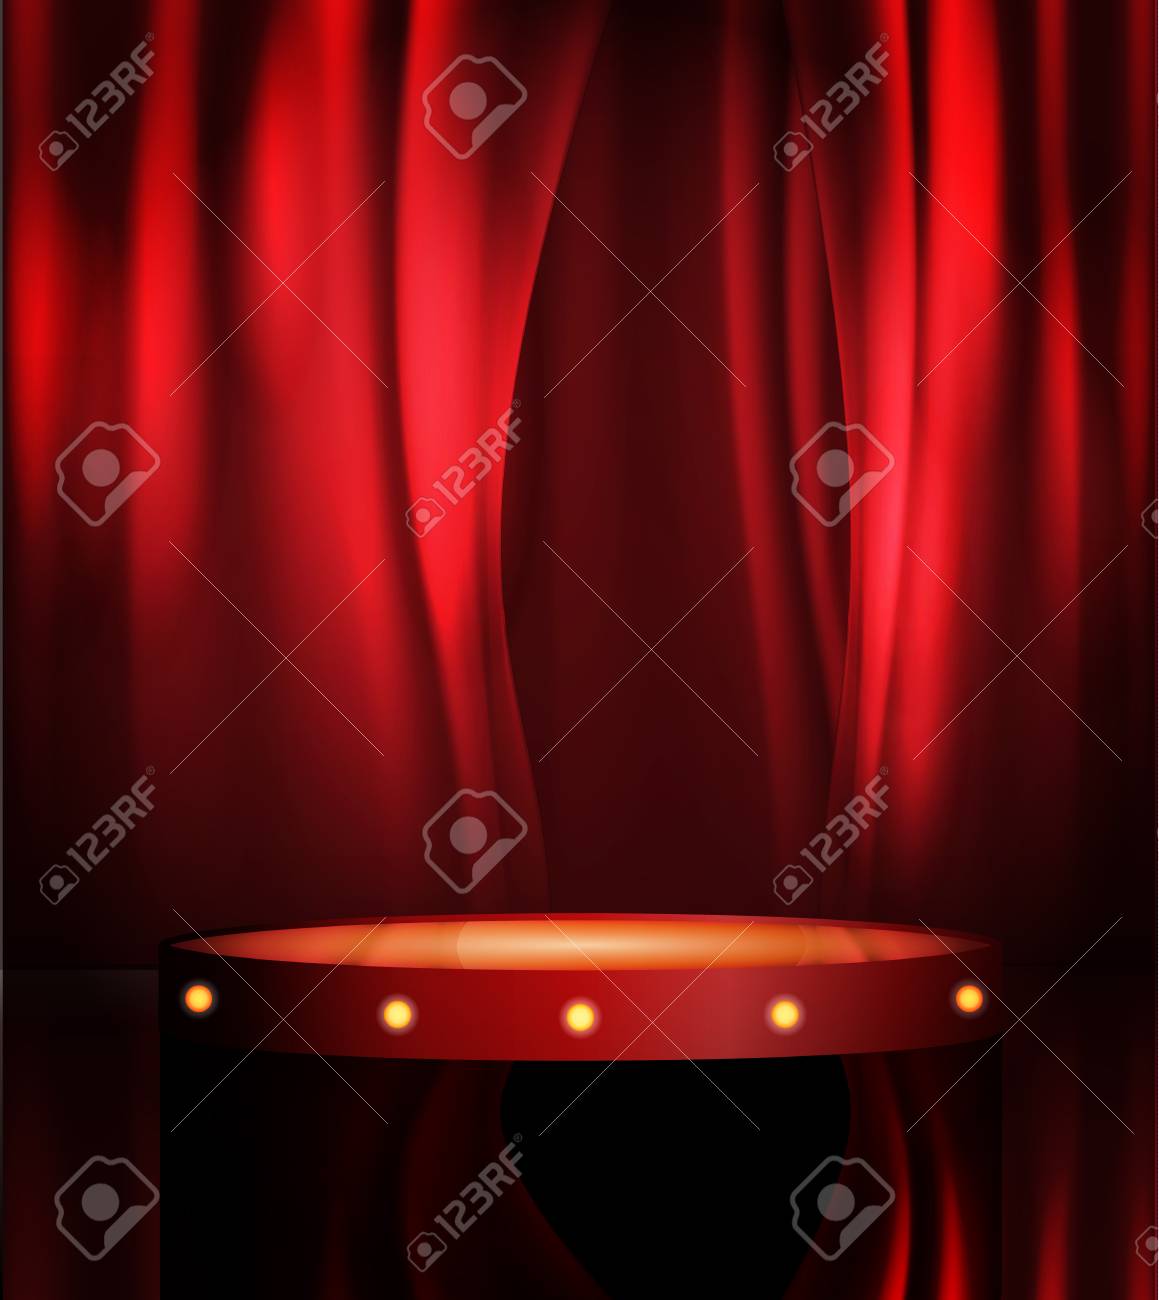 Empty Theatre Stage Vector Art Image Illustration Stand Up